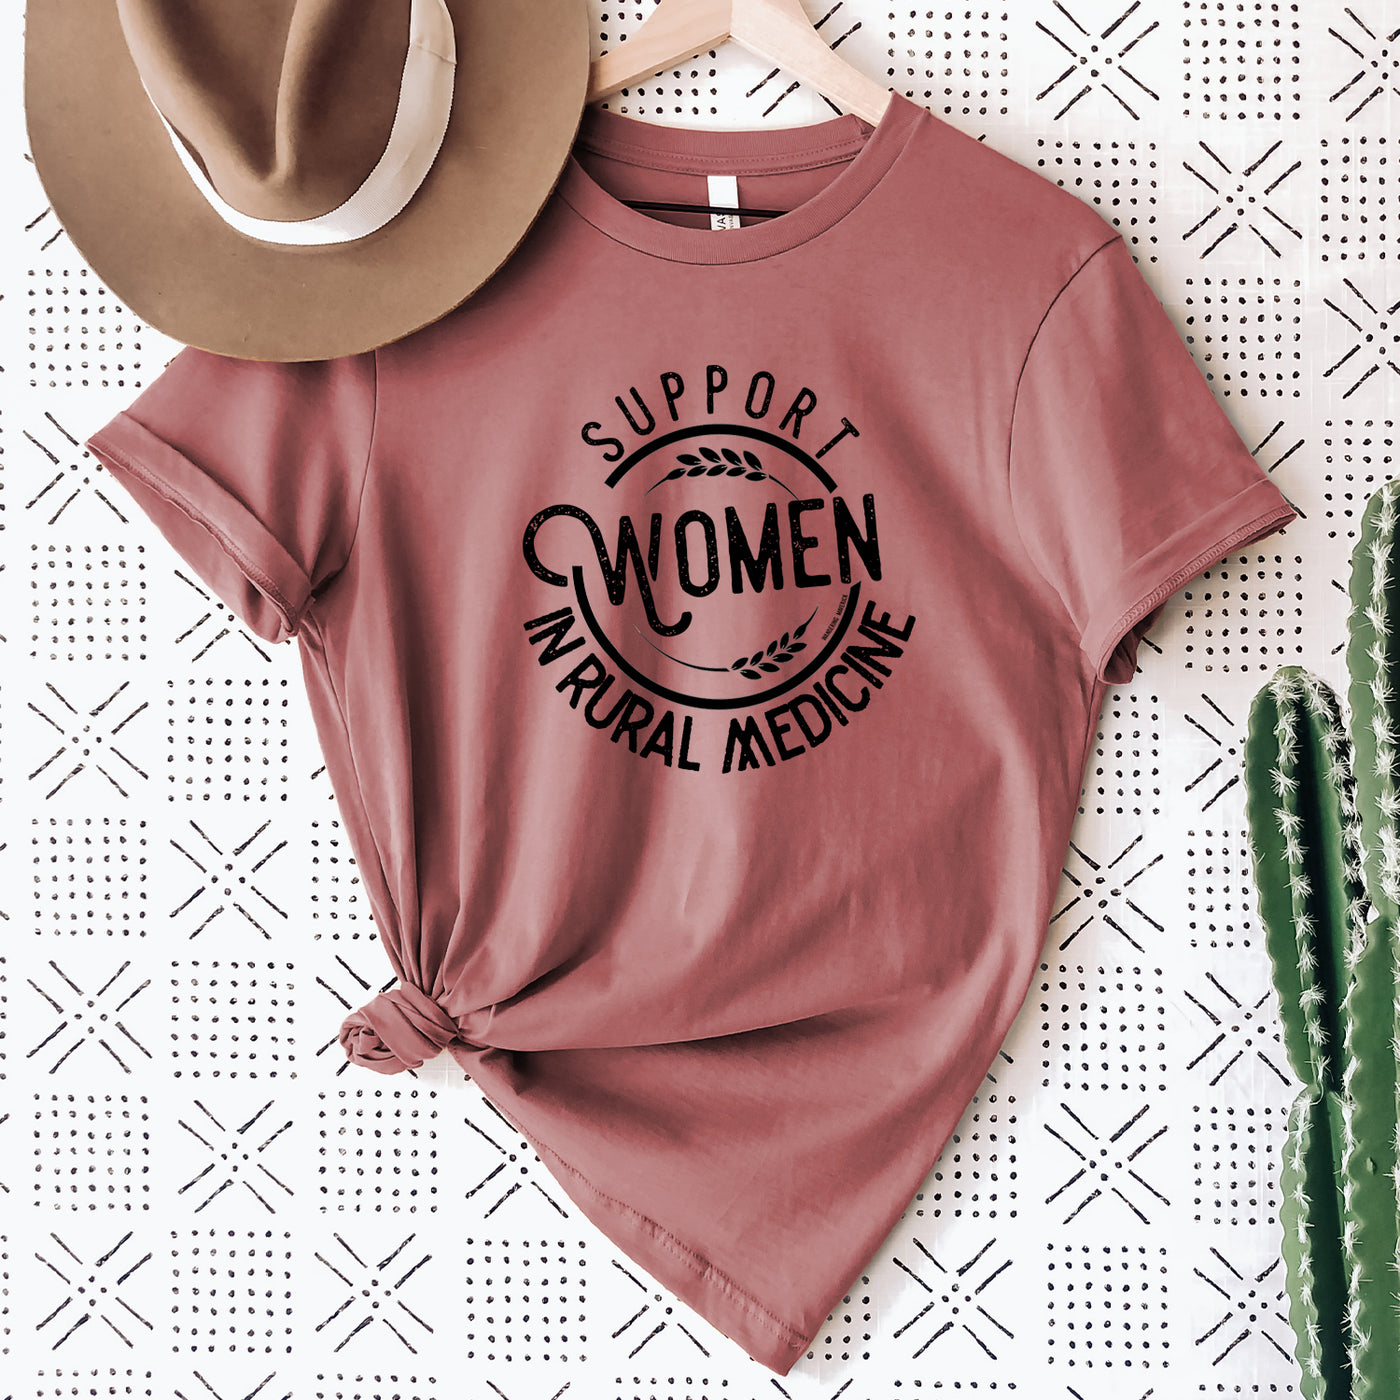 Support Women In Rural Medicine T-Shirt (XS-4XL) - Multiple Colors!